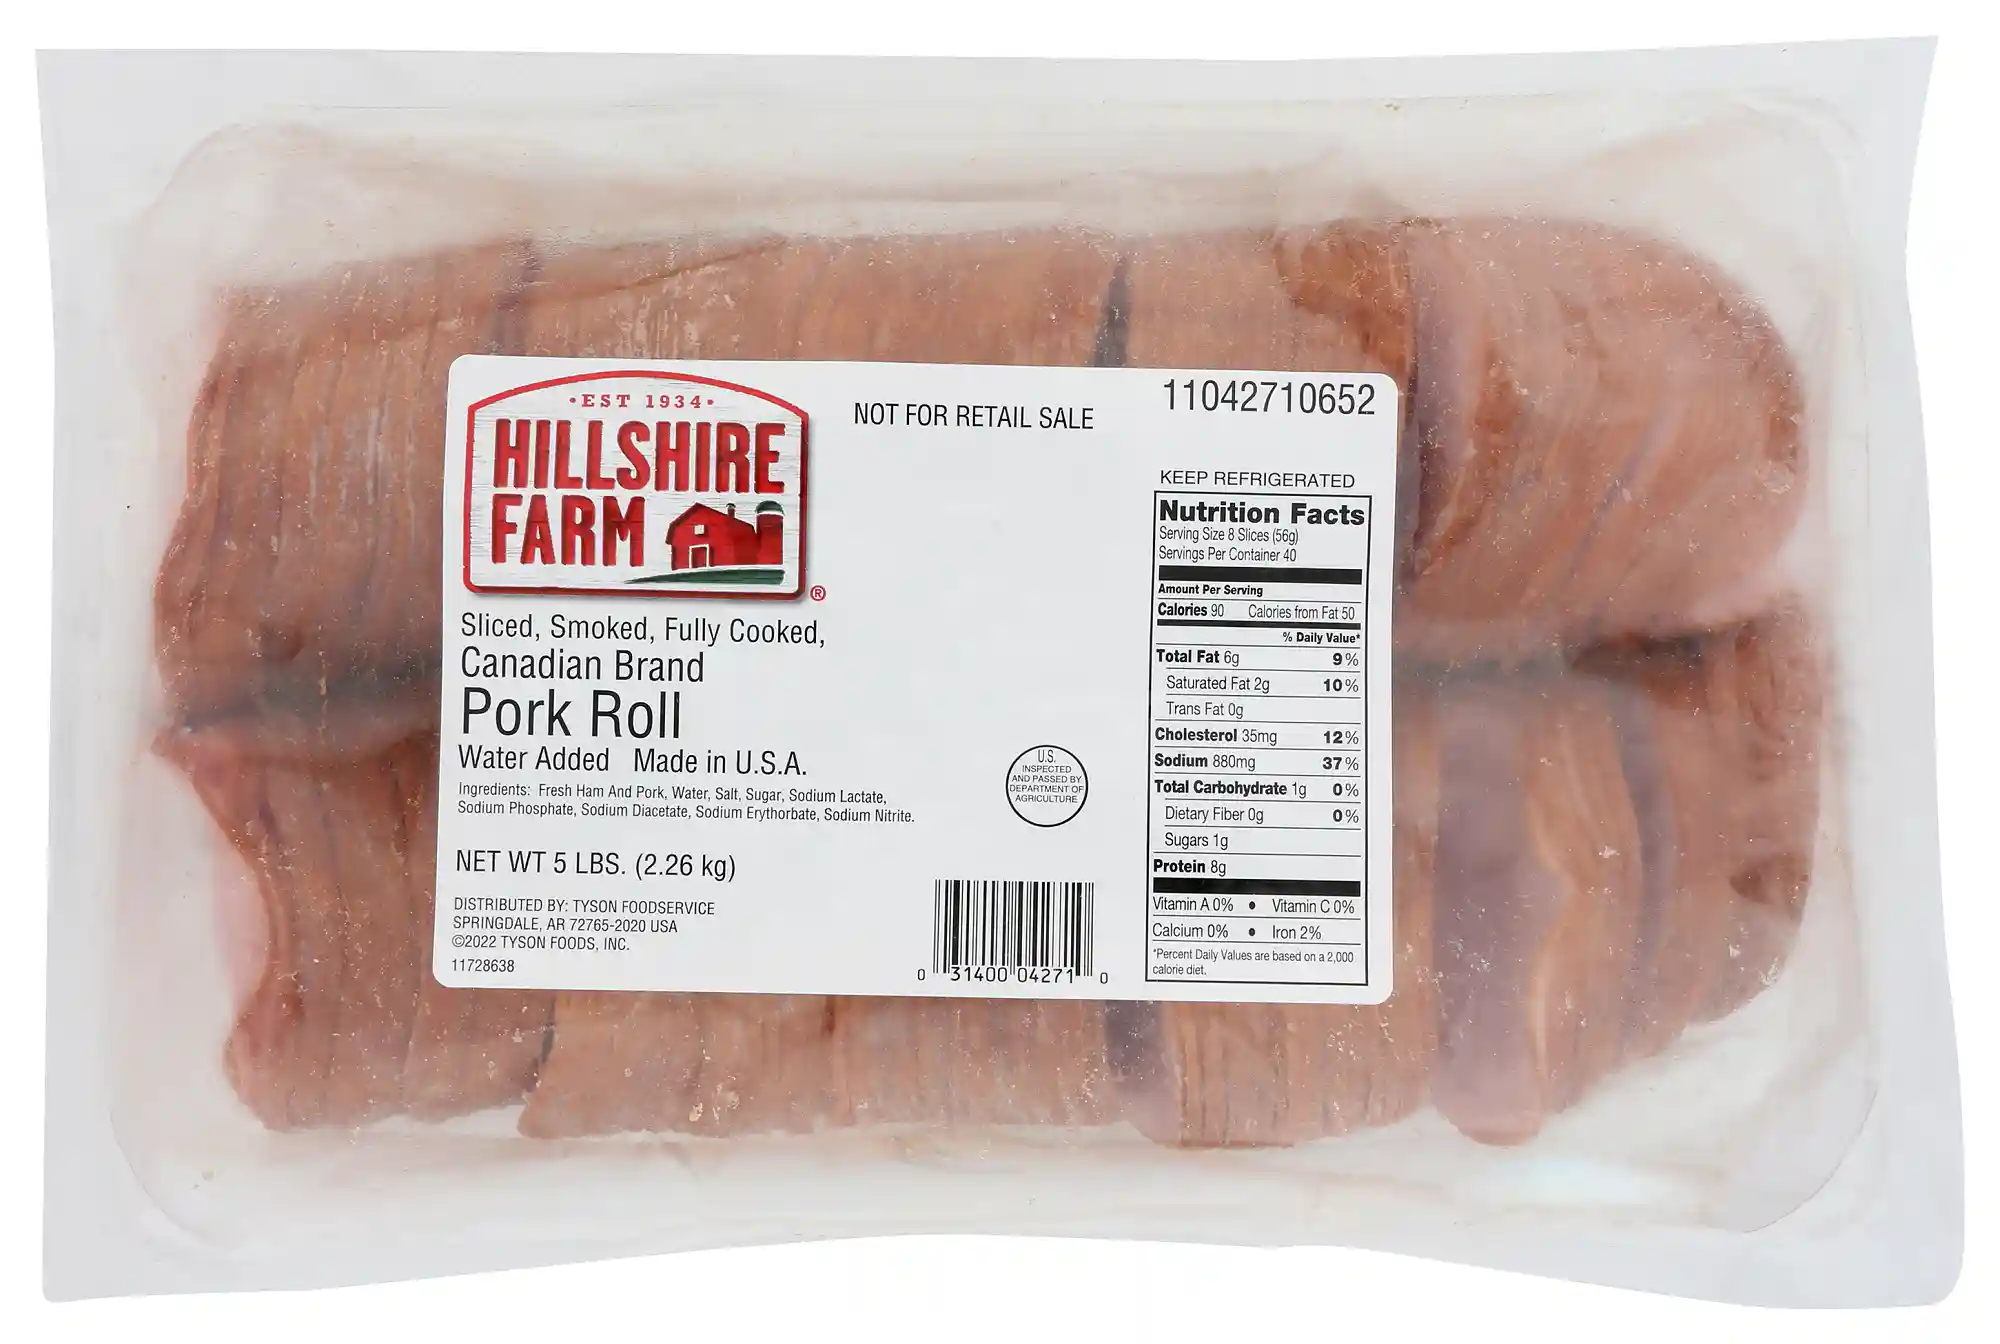 Hillshire Farm® Smoked Fully Cooked Sliced Canadian Brand Pork Roll_image_21